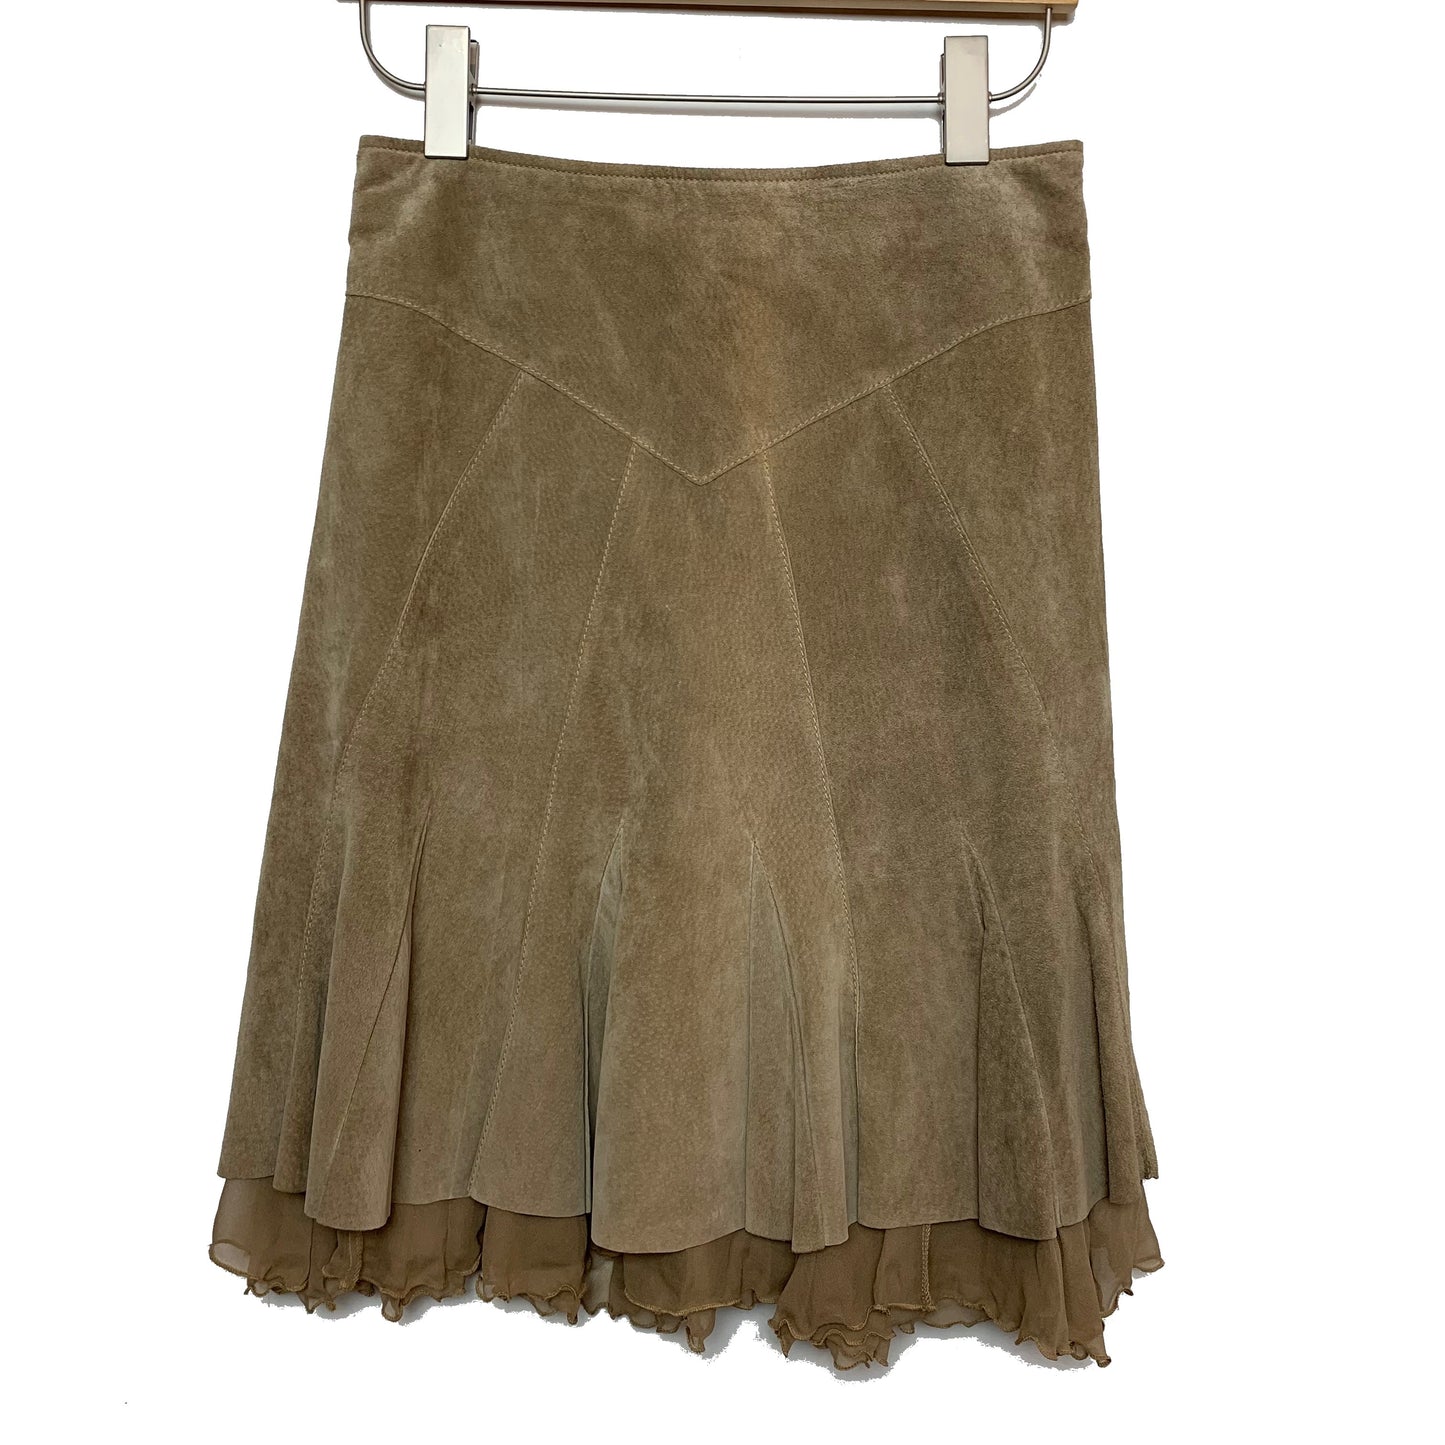 June Suede Leather Flared Skirt with Ruffle 0